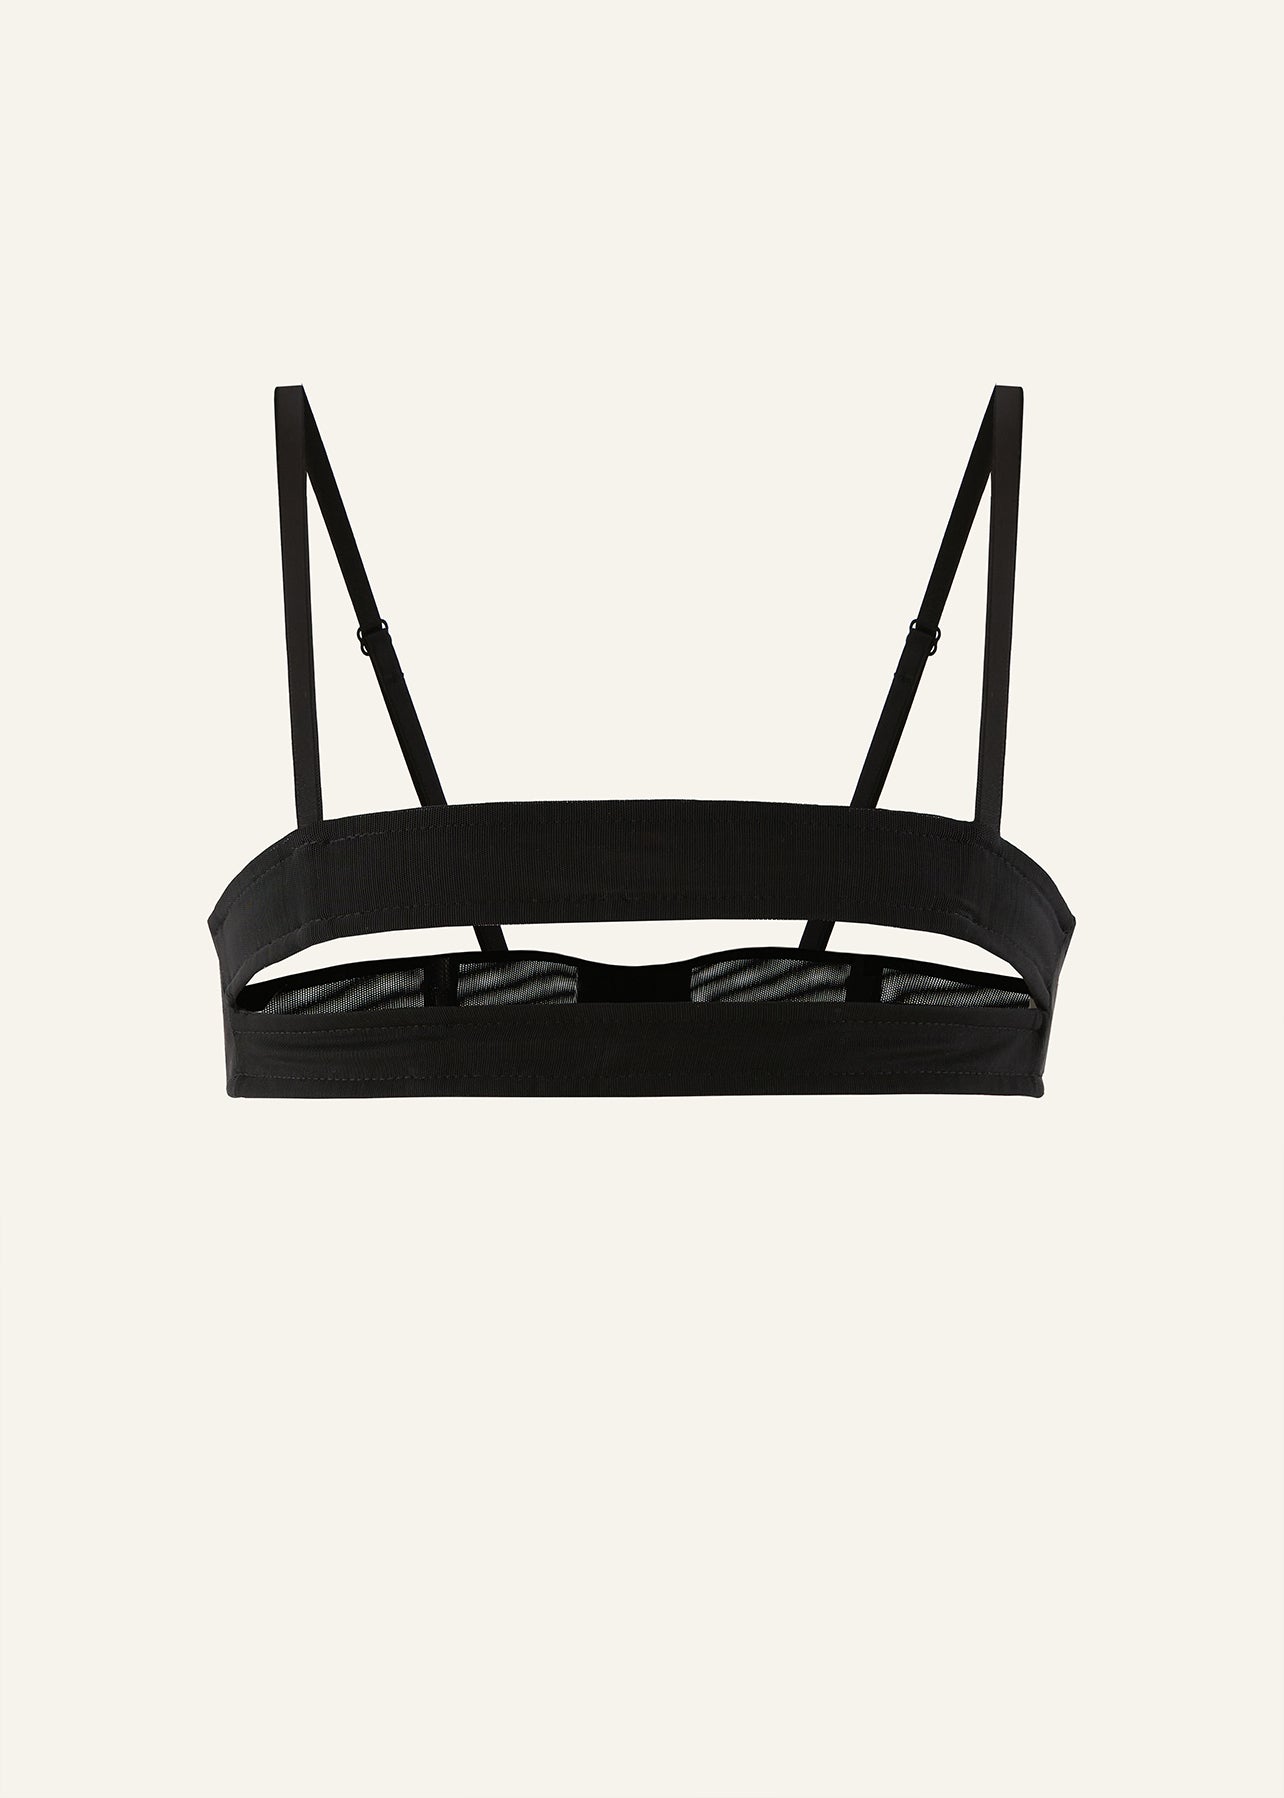 Product photography of a black mesh croptop with horizontal cut